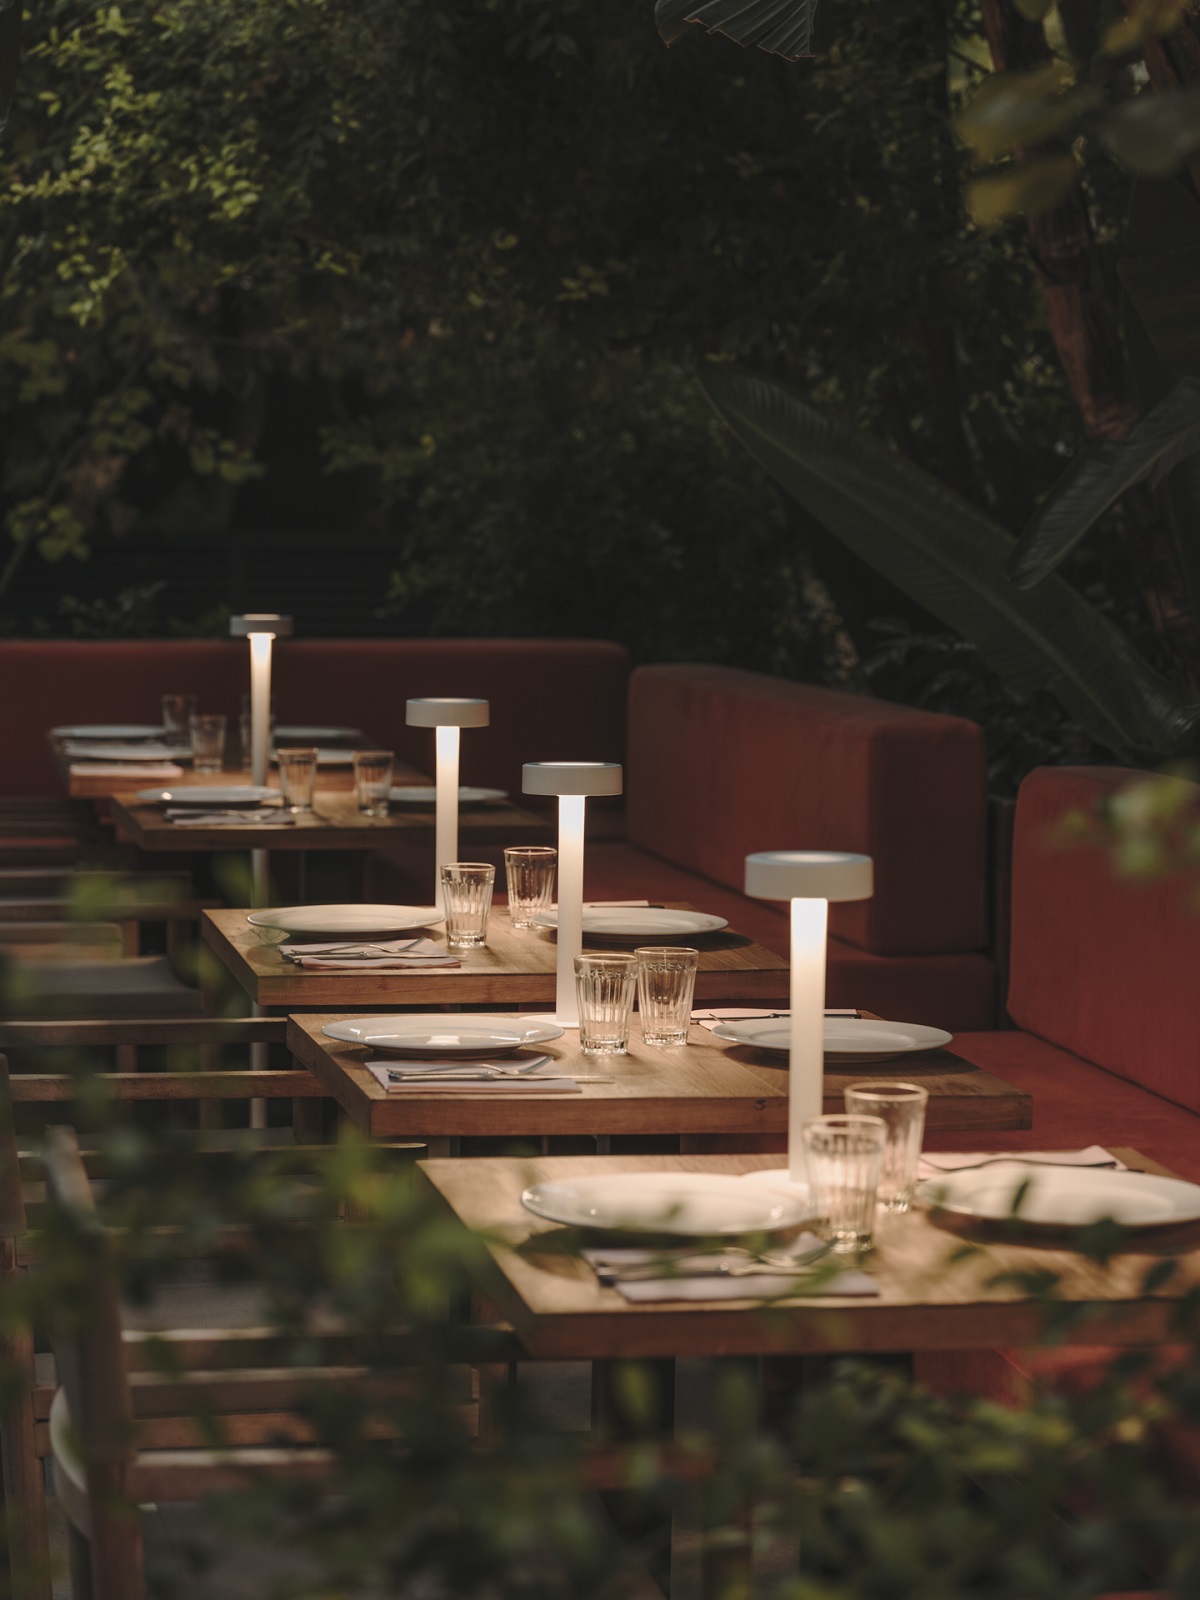 A series of table lights in outdoor restaurant